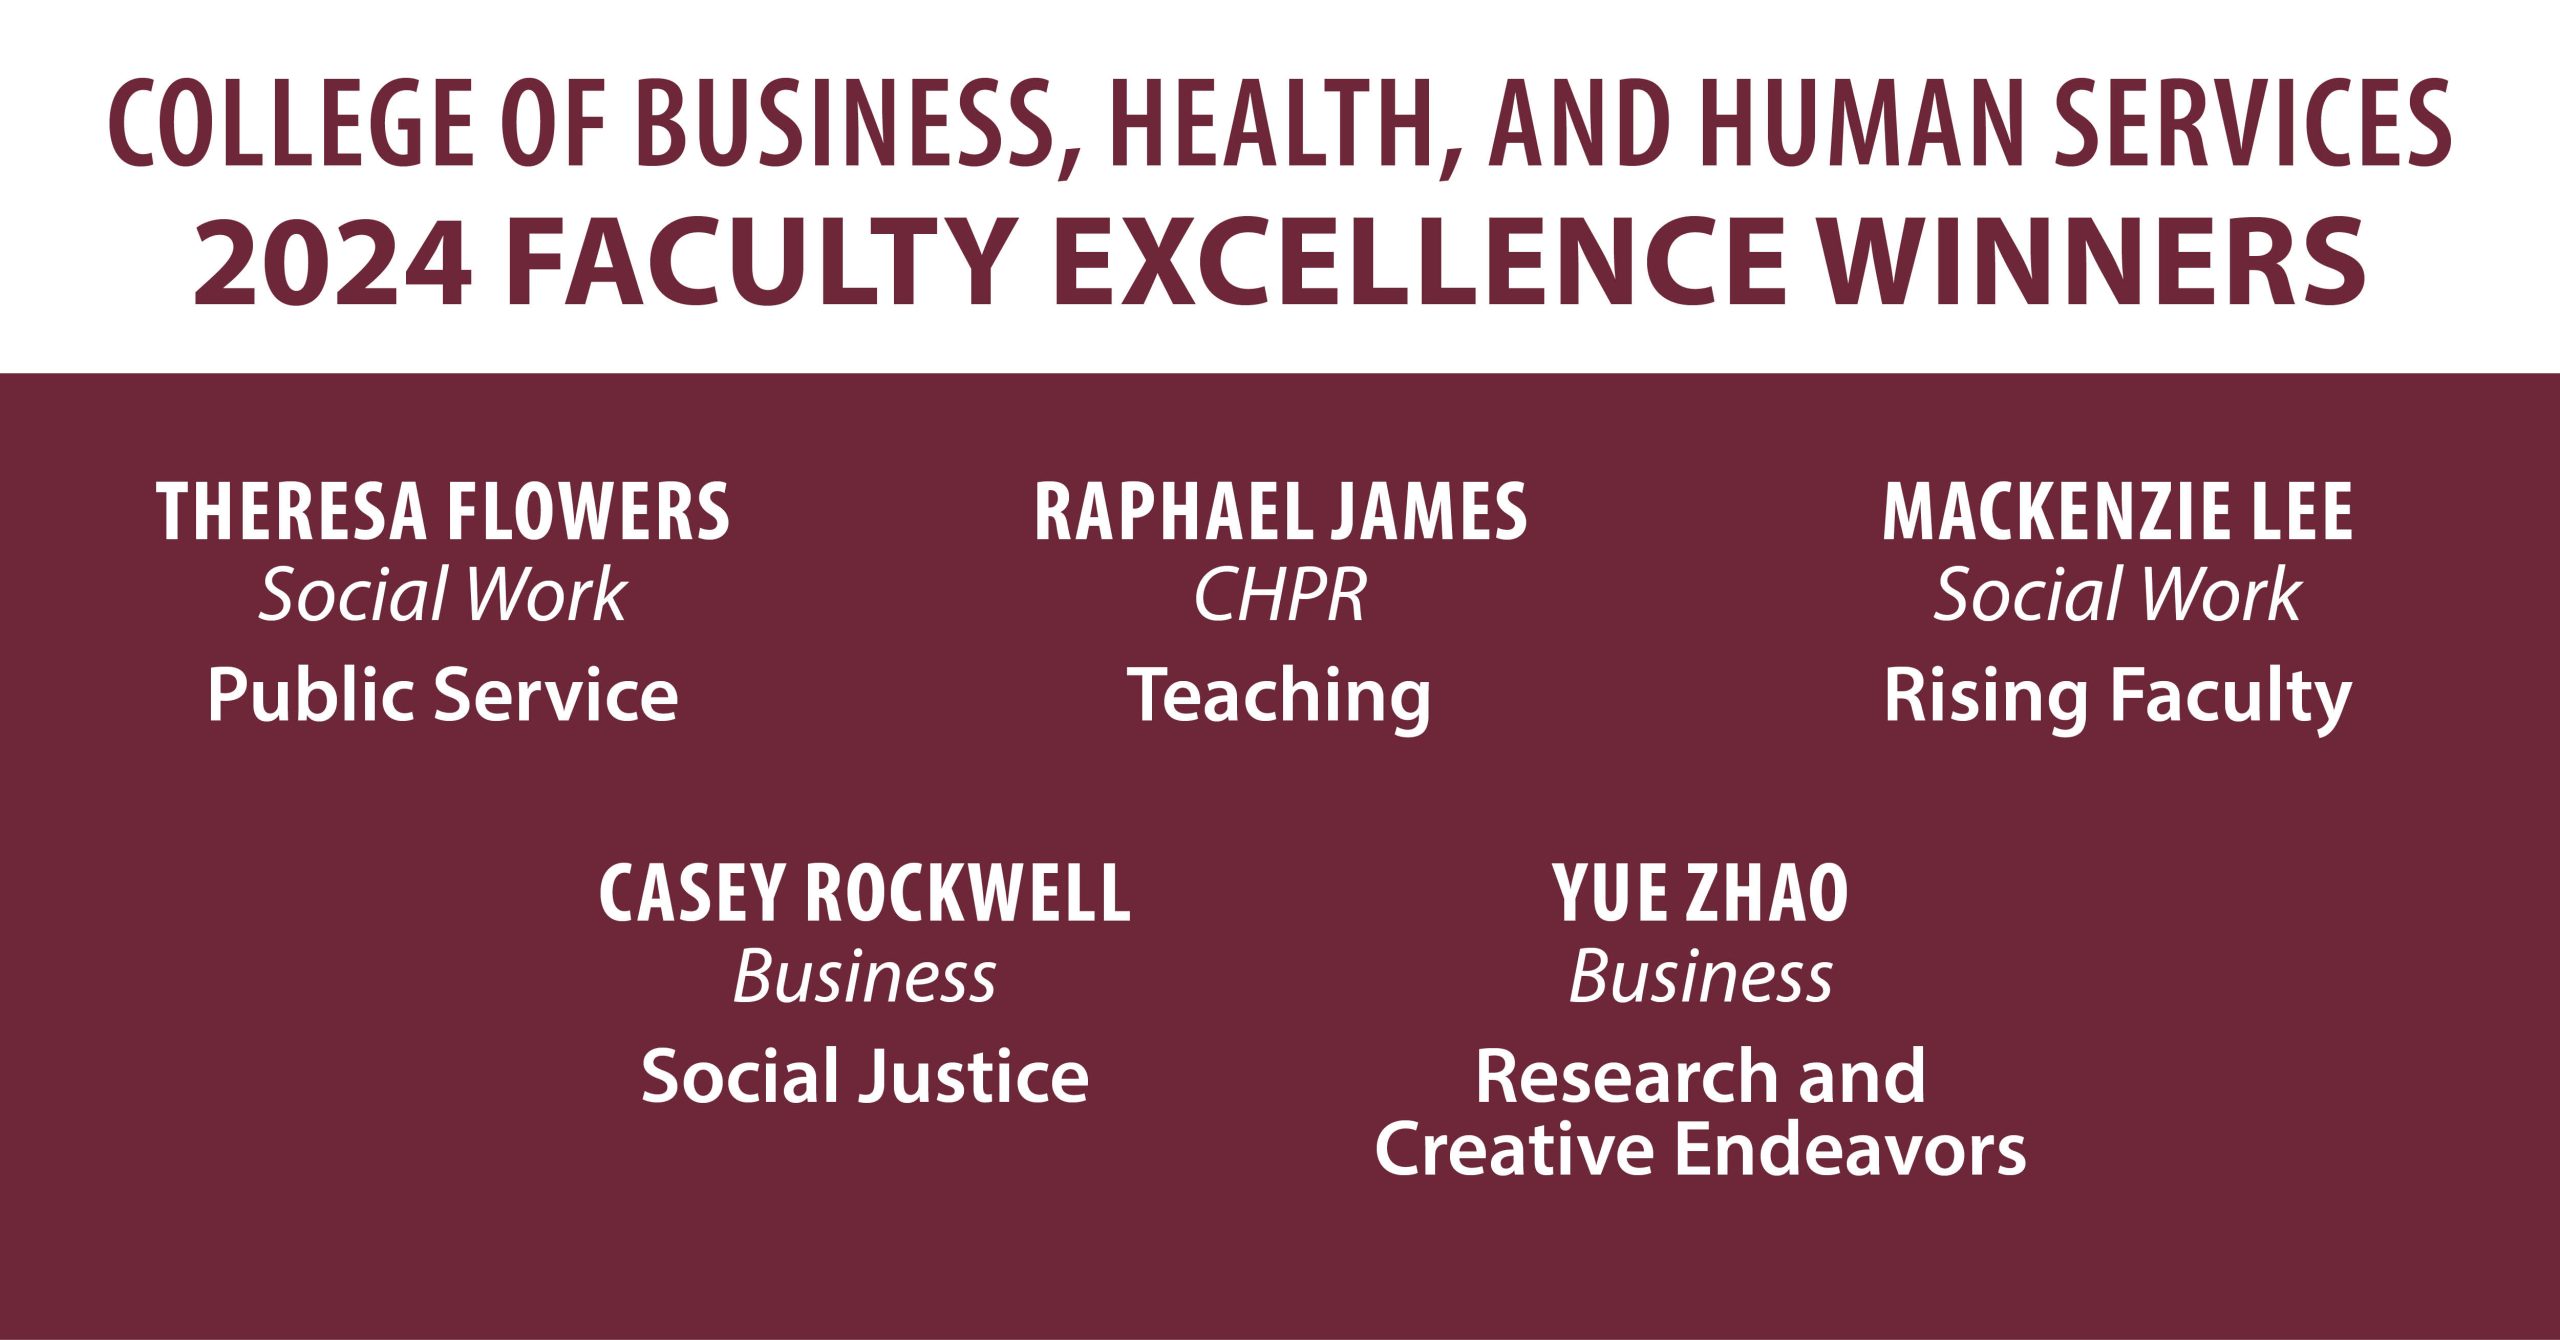 The UA Little Rock College of Business, Health, and Human Services has named Yue Zhao, Theresa Flowers, Raphael James, Casey Rockwell, and Mackenzie Lee as the college-level winners of the 2024 Faculty Excellence Awards.